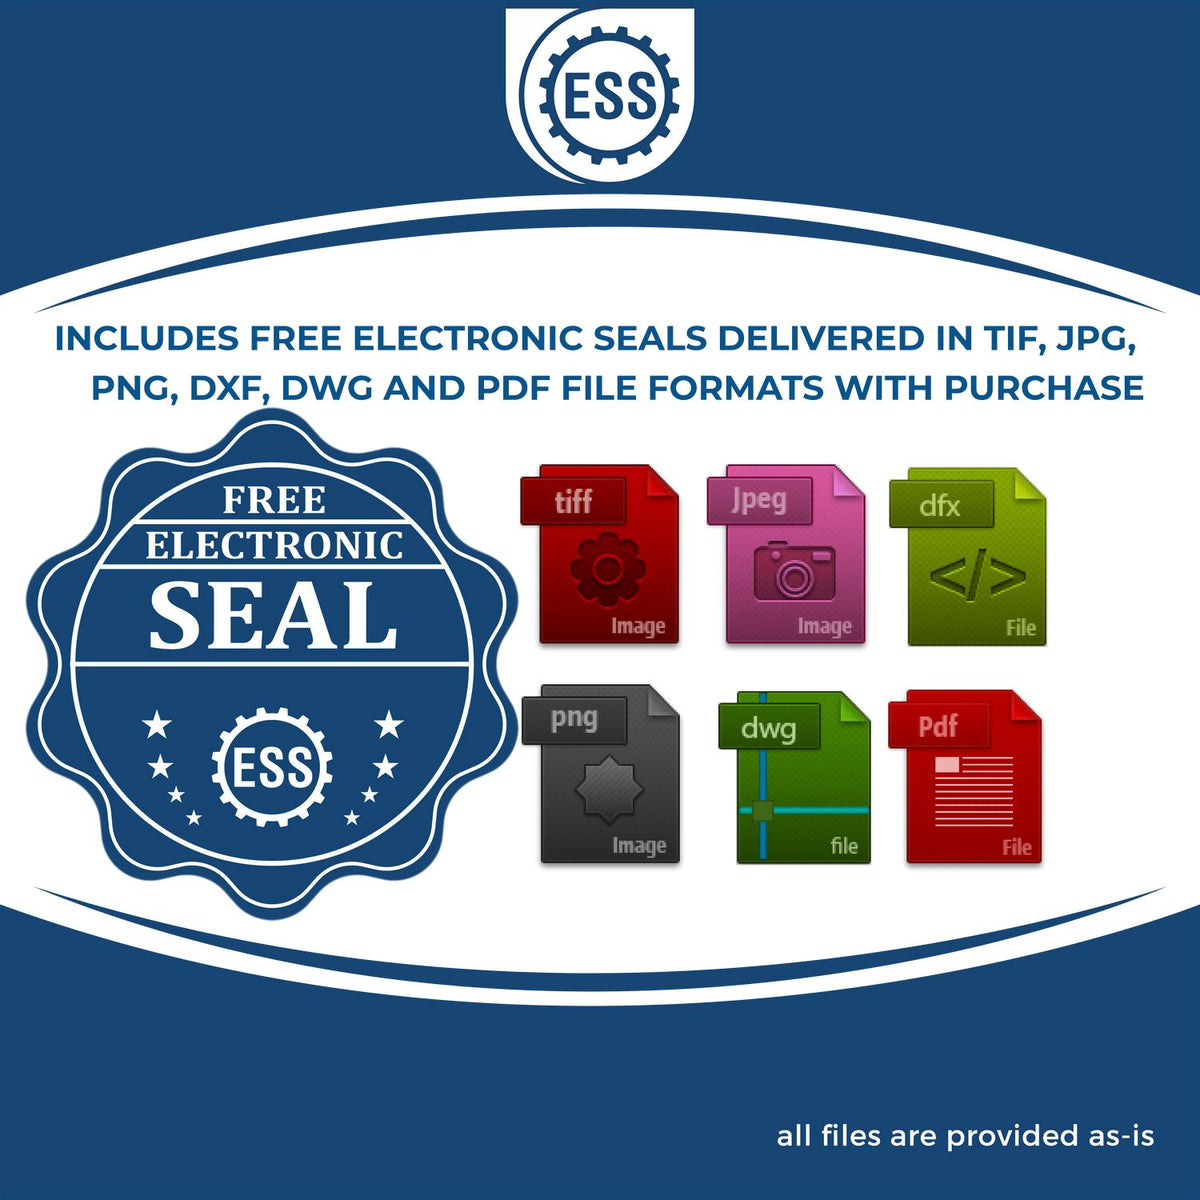 An infographic for the free electronic seal for the Hybrid Montana Land Surveyor Seal illustrating the different file type icons such as DXF, DWG, TIF, JPG and PNG.